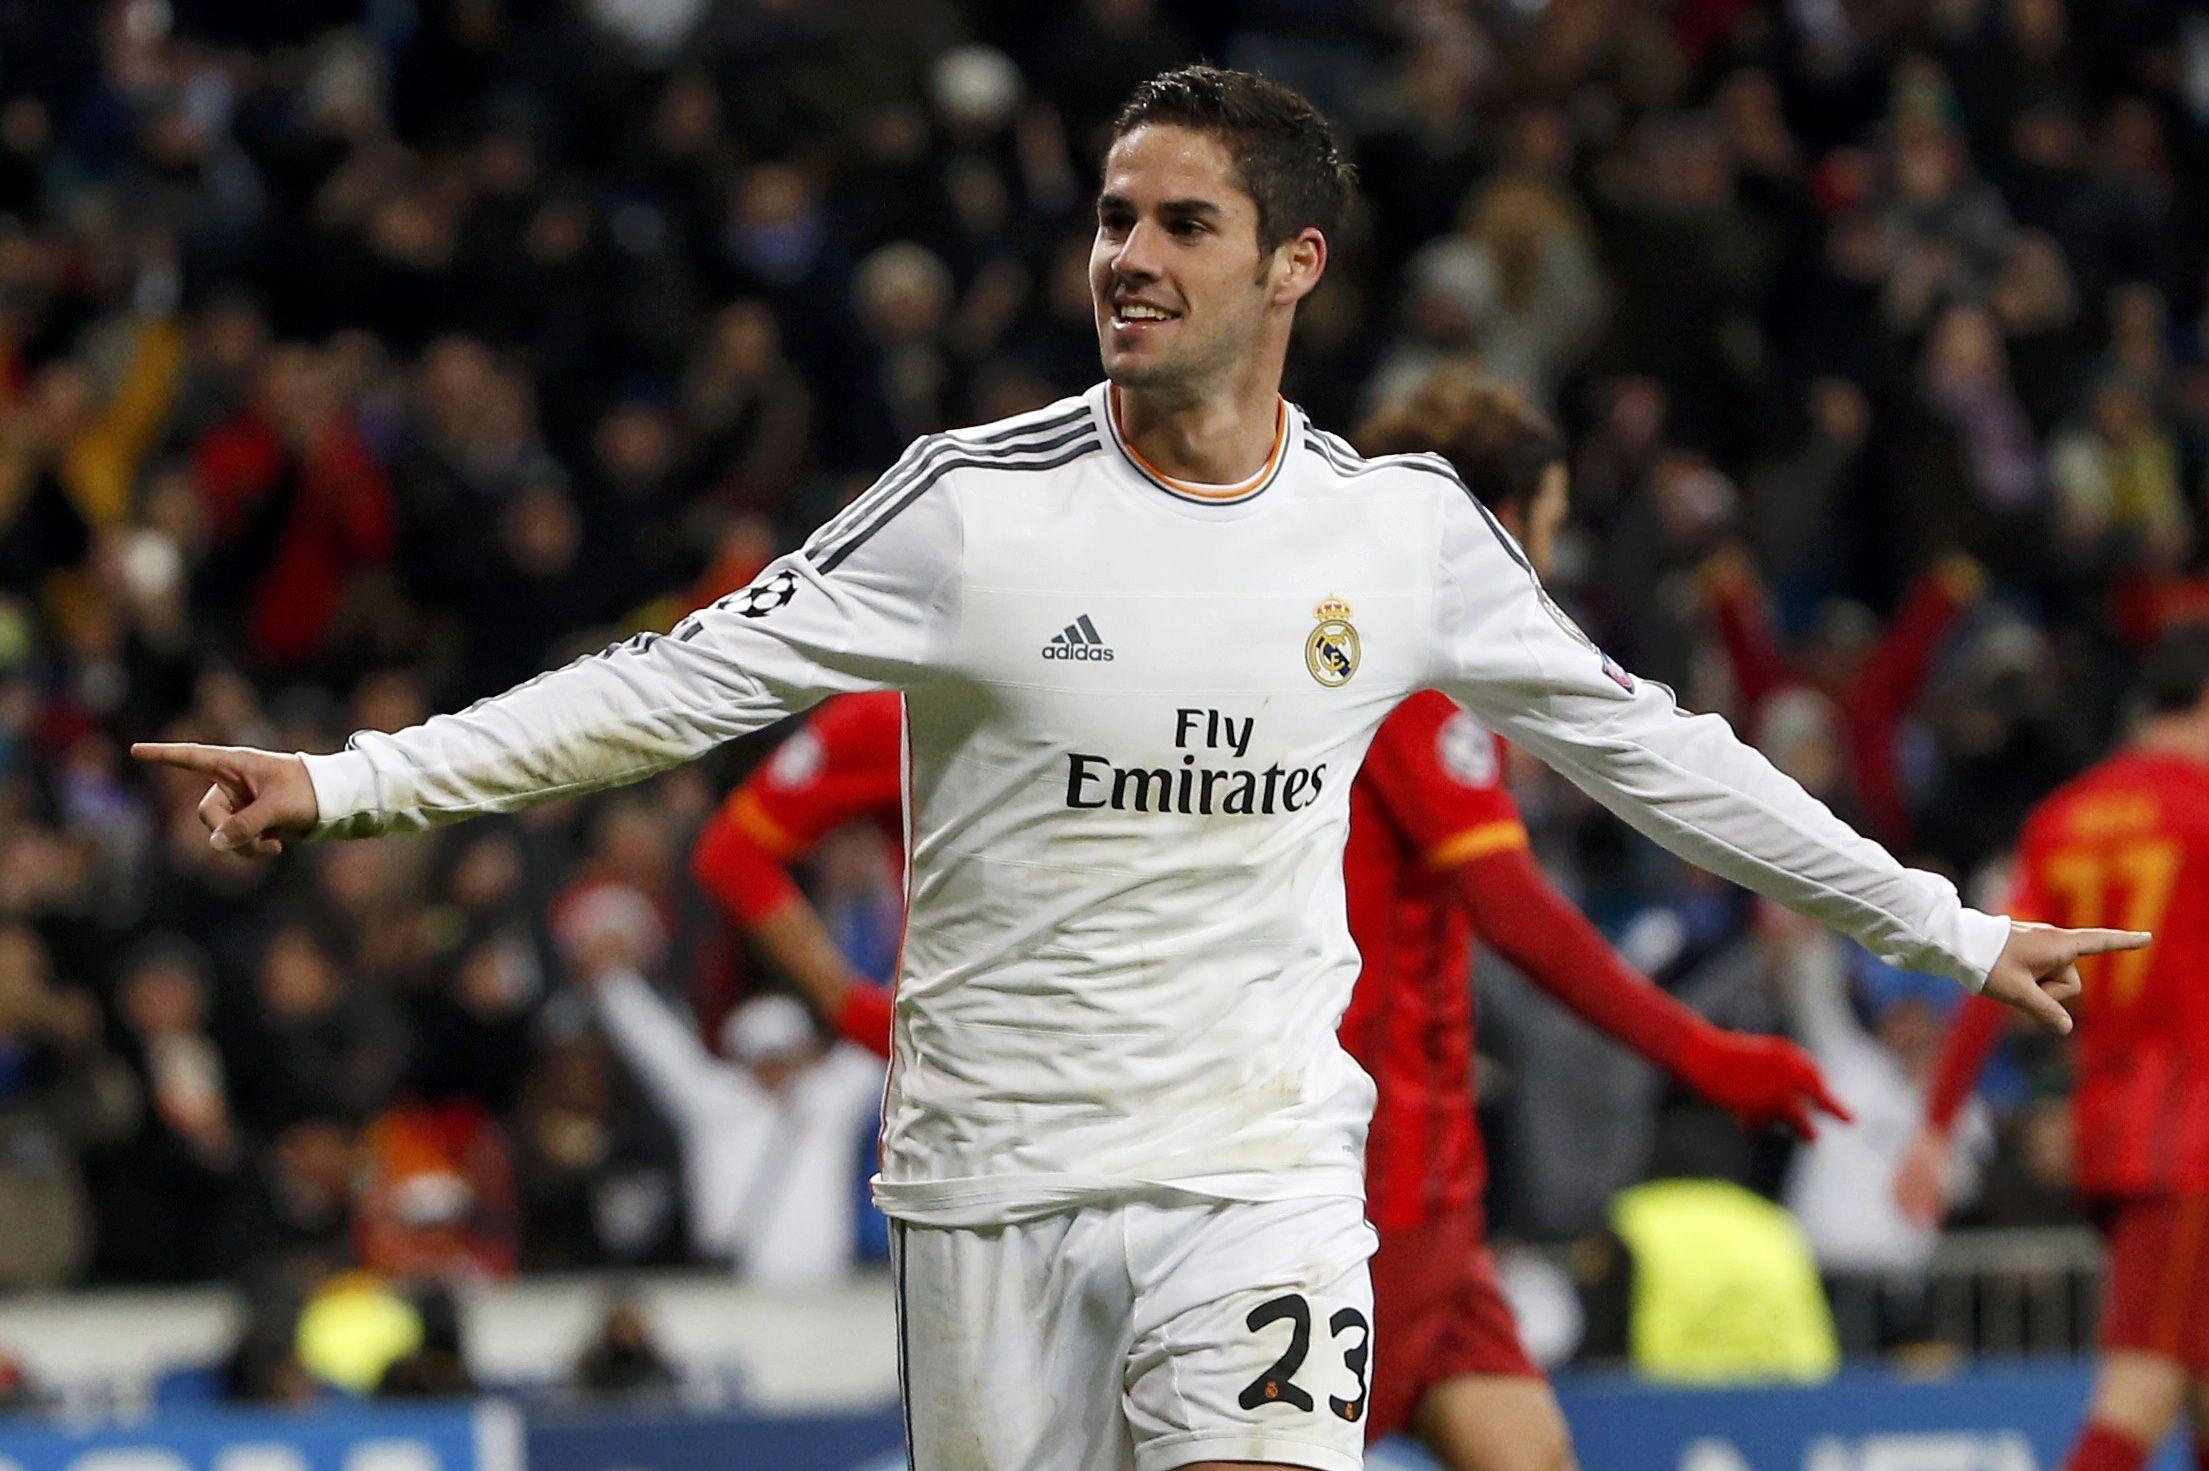 Evaluating Isco and his potential fit at Arsenal